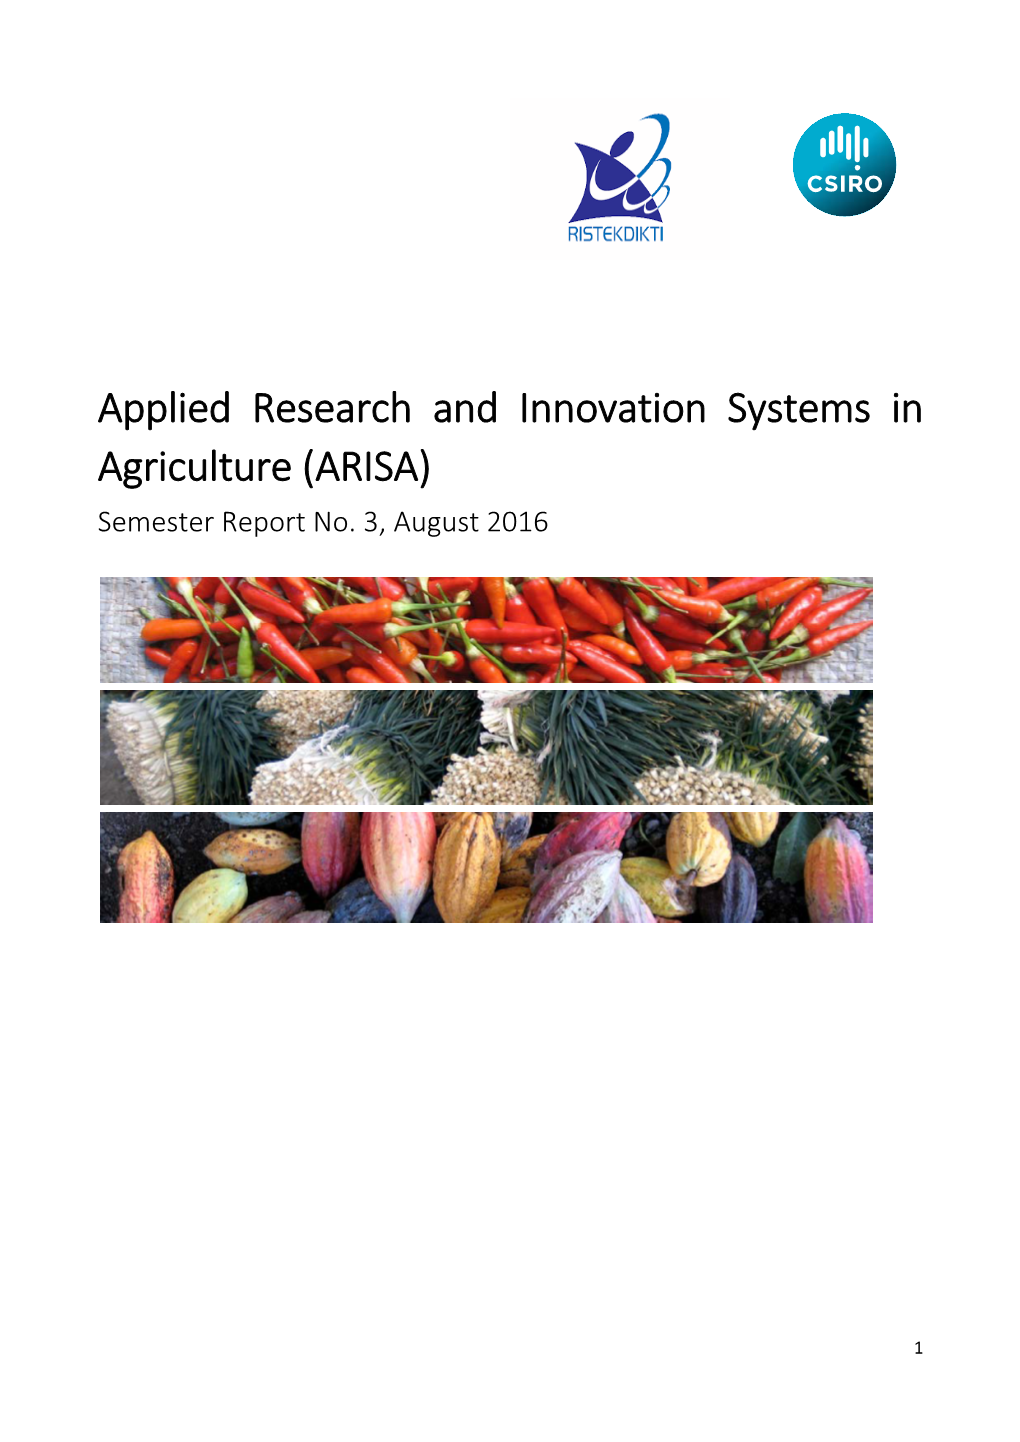 Applied Research and Innovation Systems in Agriculture (ARISA) Semester Report No